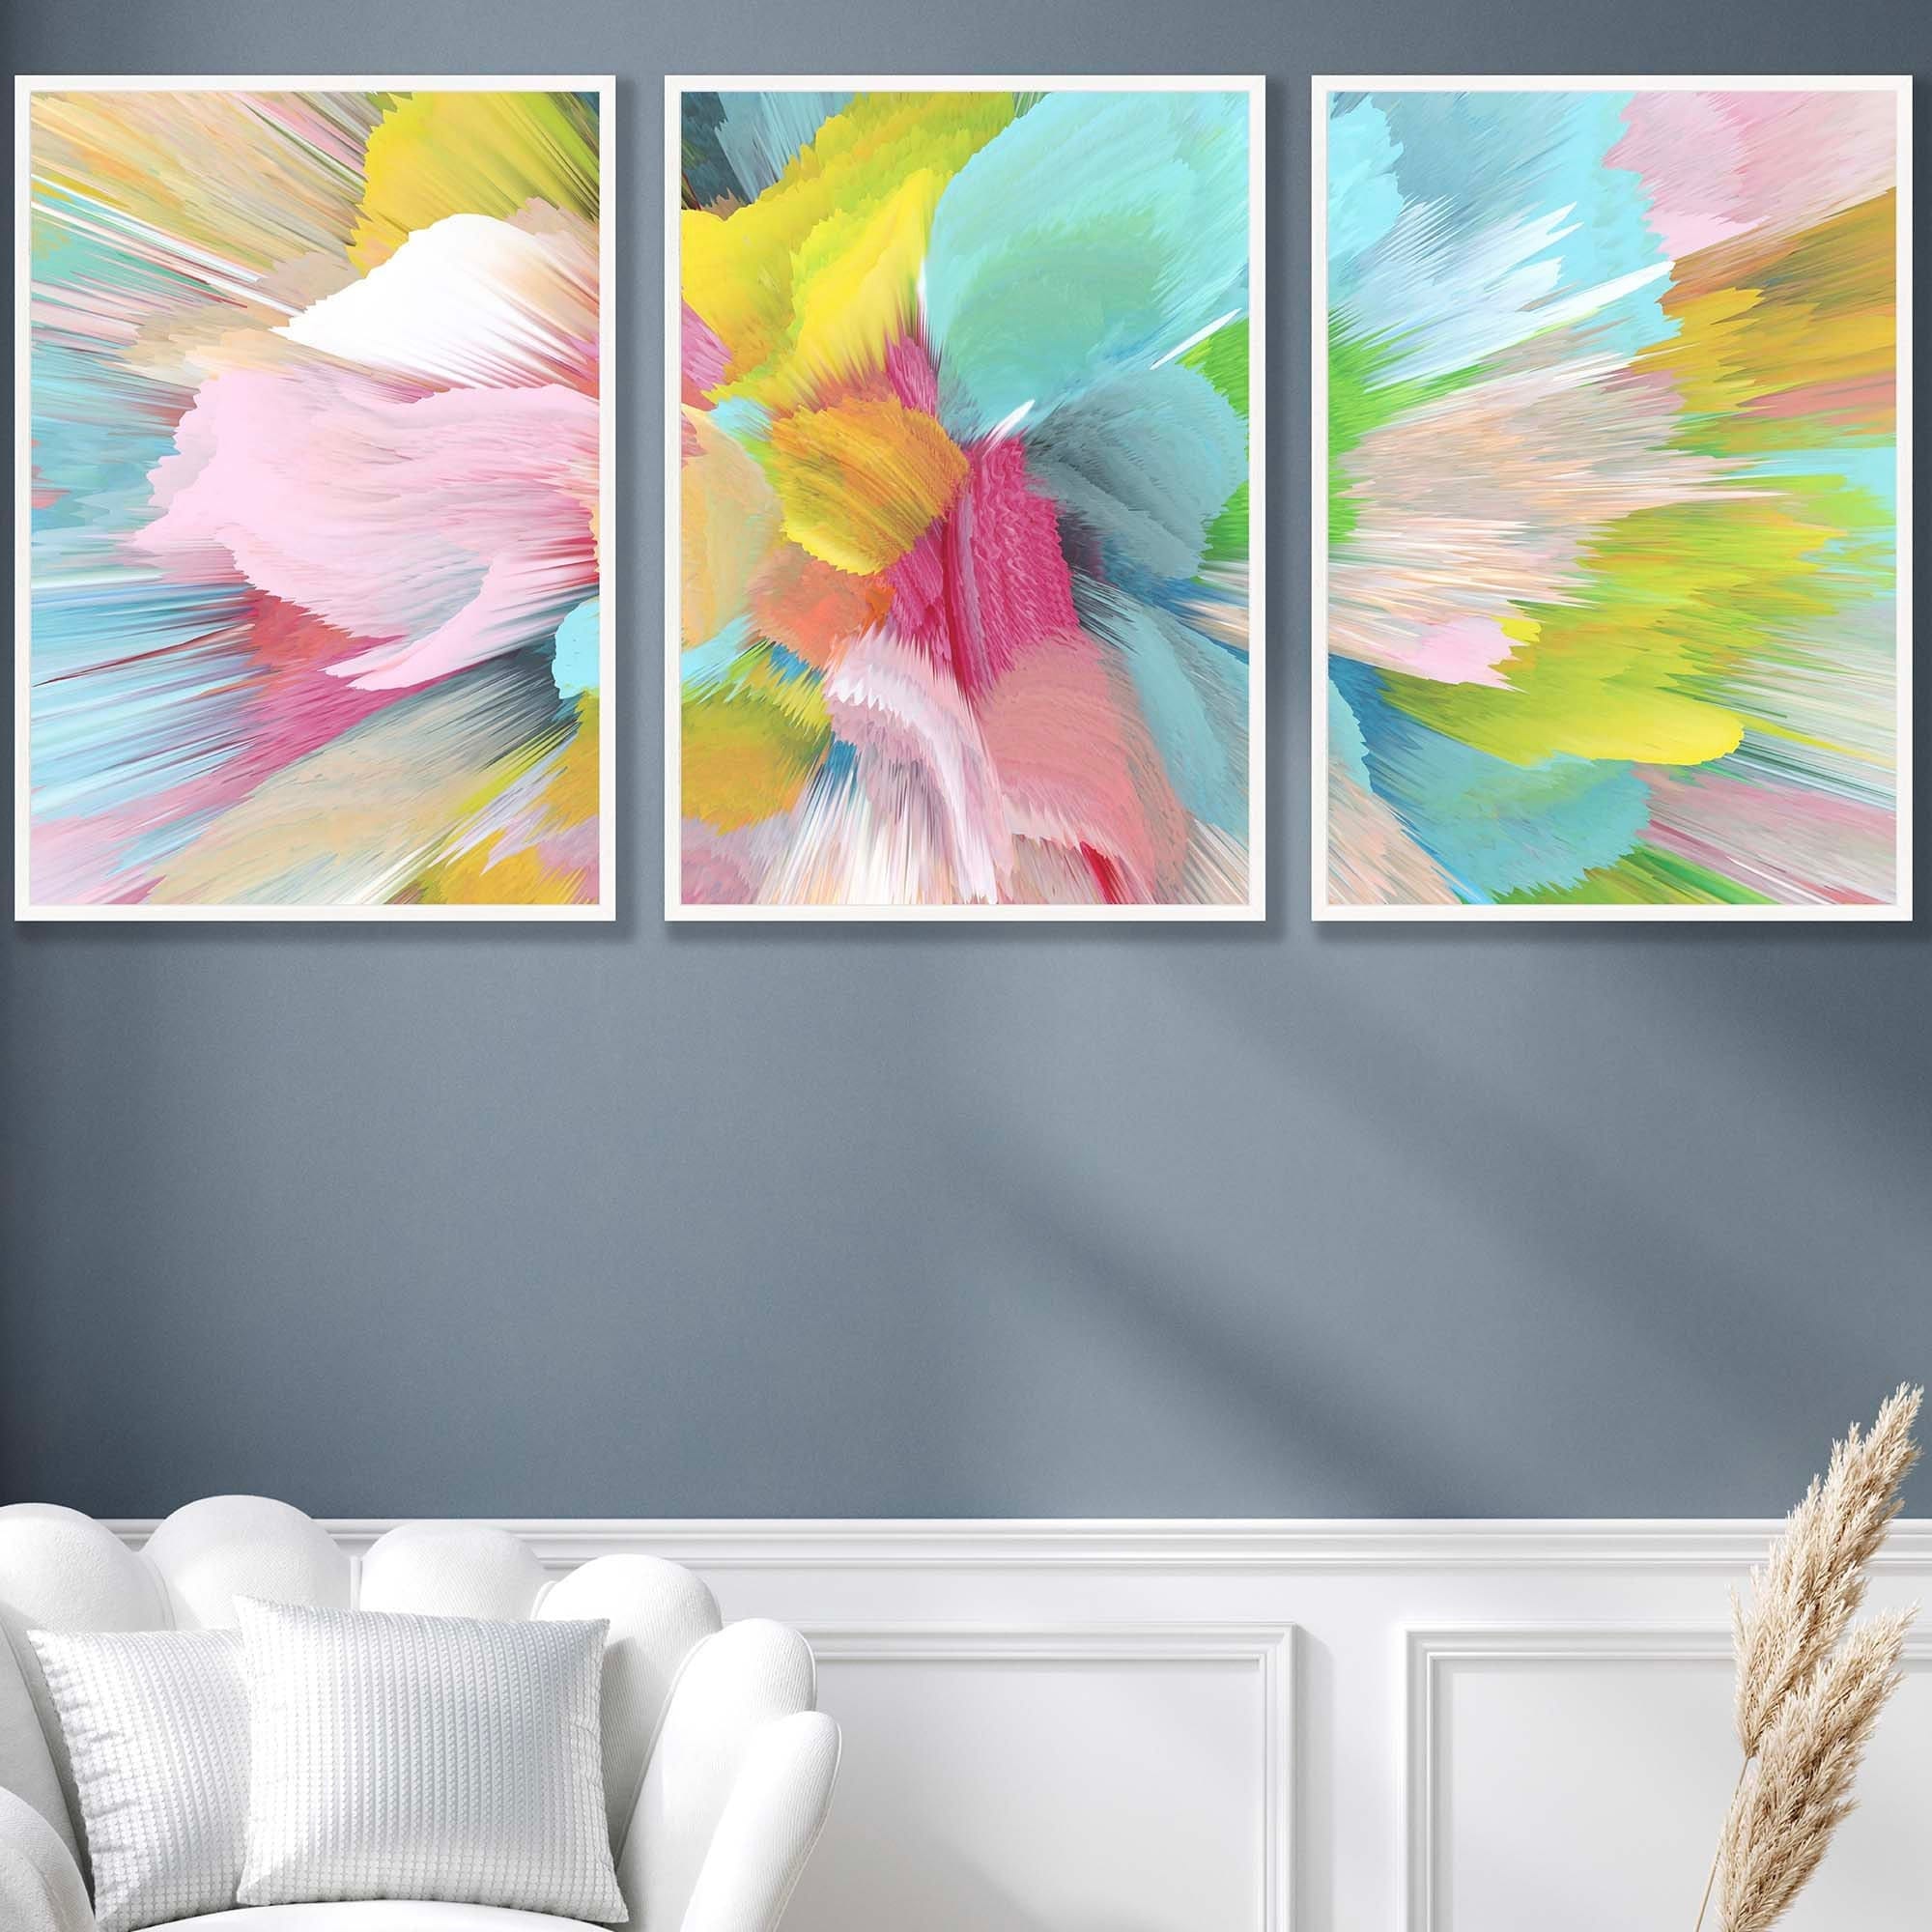 Set of 3 Abstract Bright Painted Fractal Wall Art Prints Framed Colourful Posters | Artze Wall Art UK